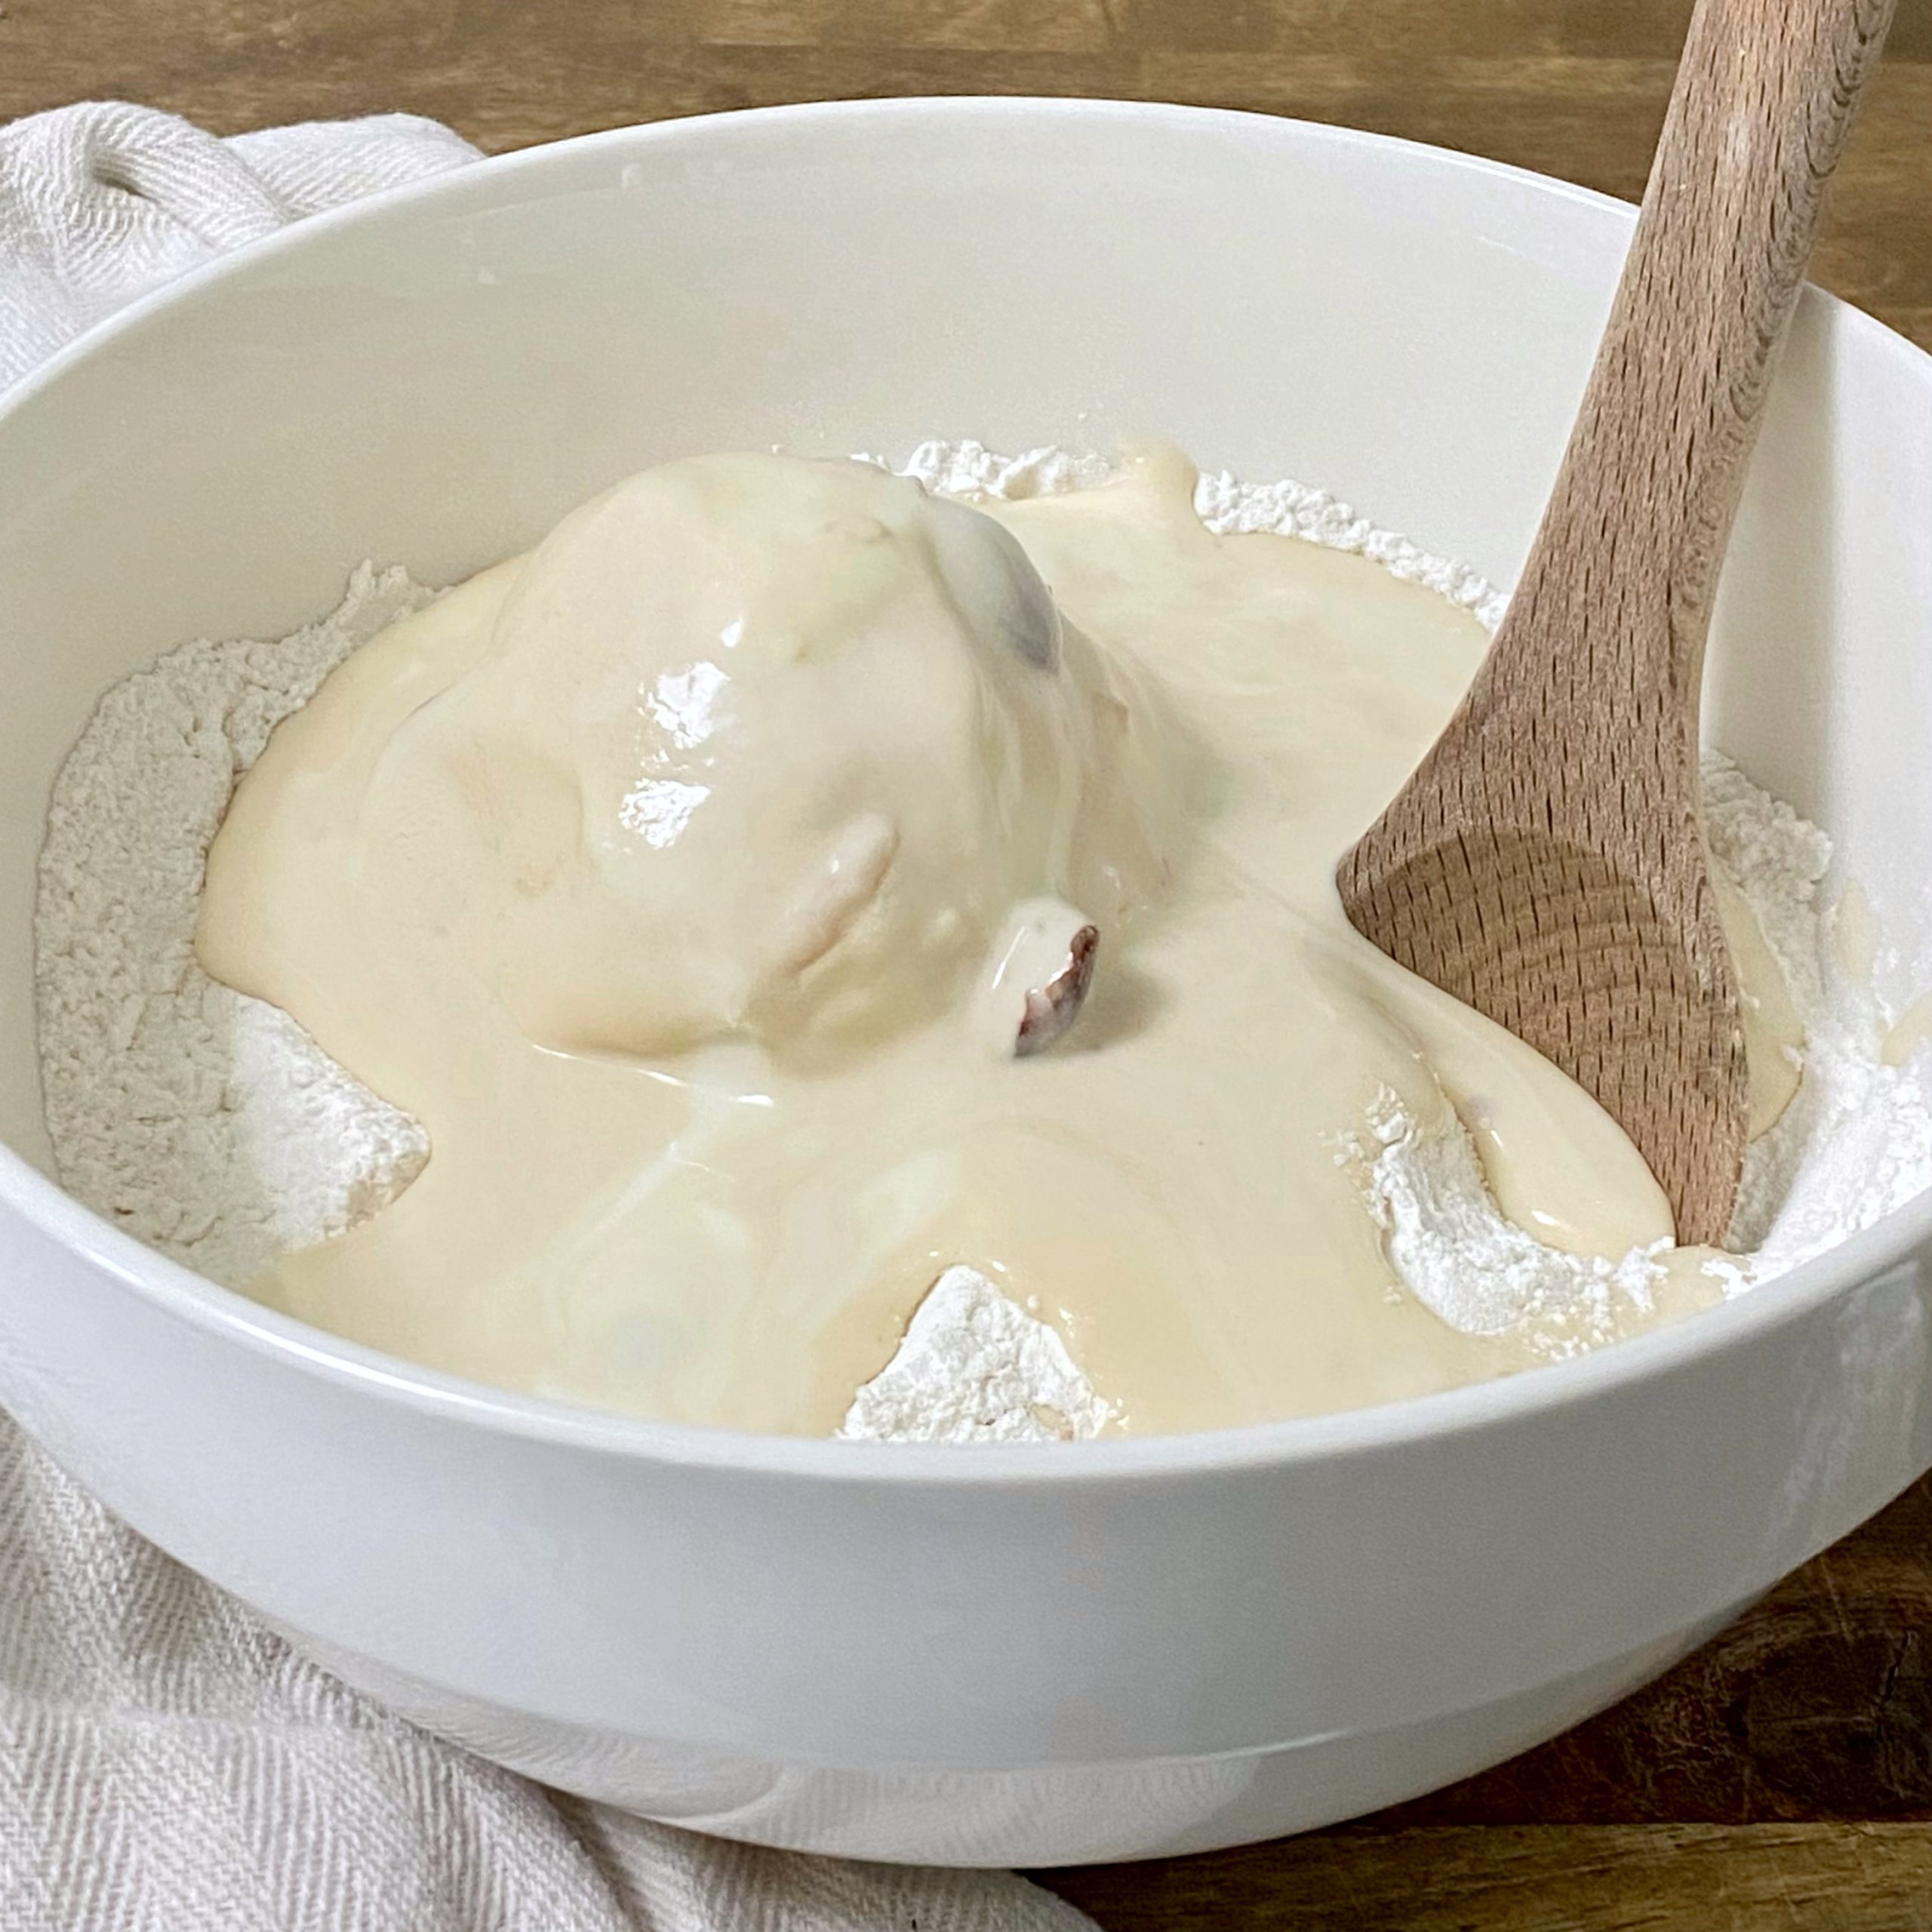 Flour and ice cream in a white mixing bowl with a wooden spoon.